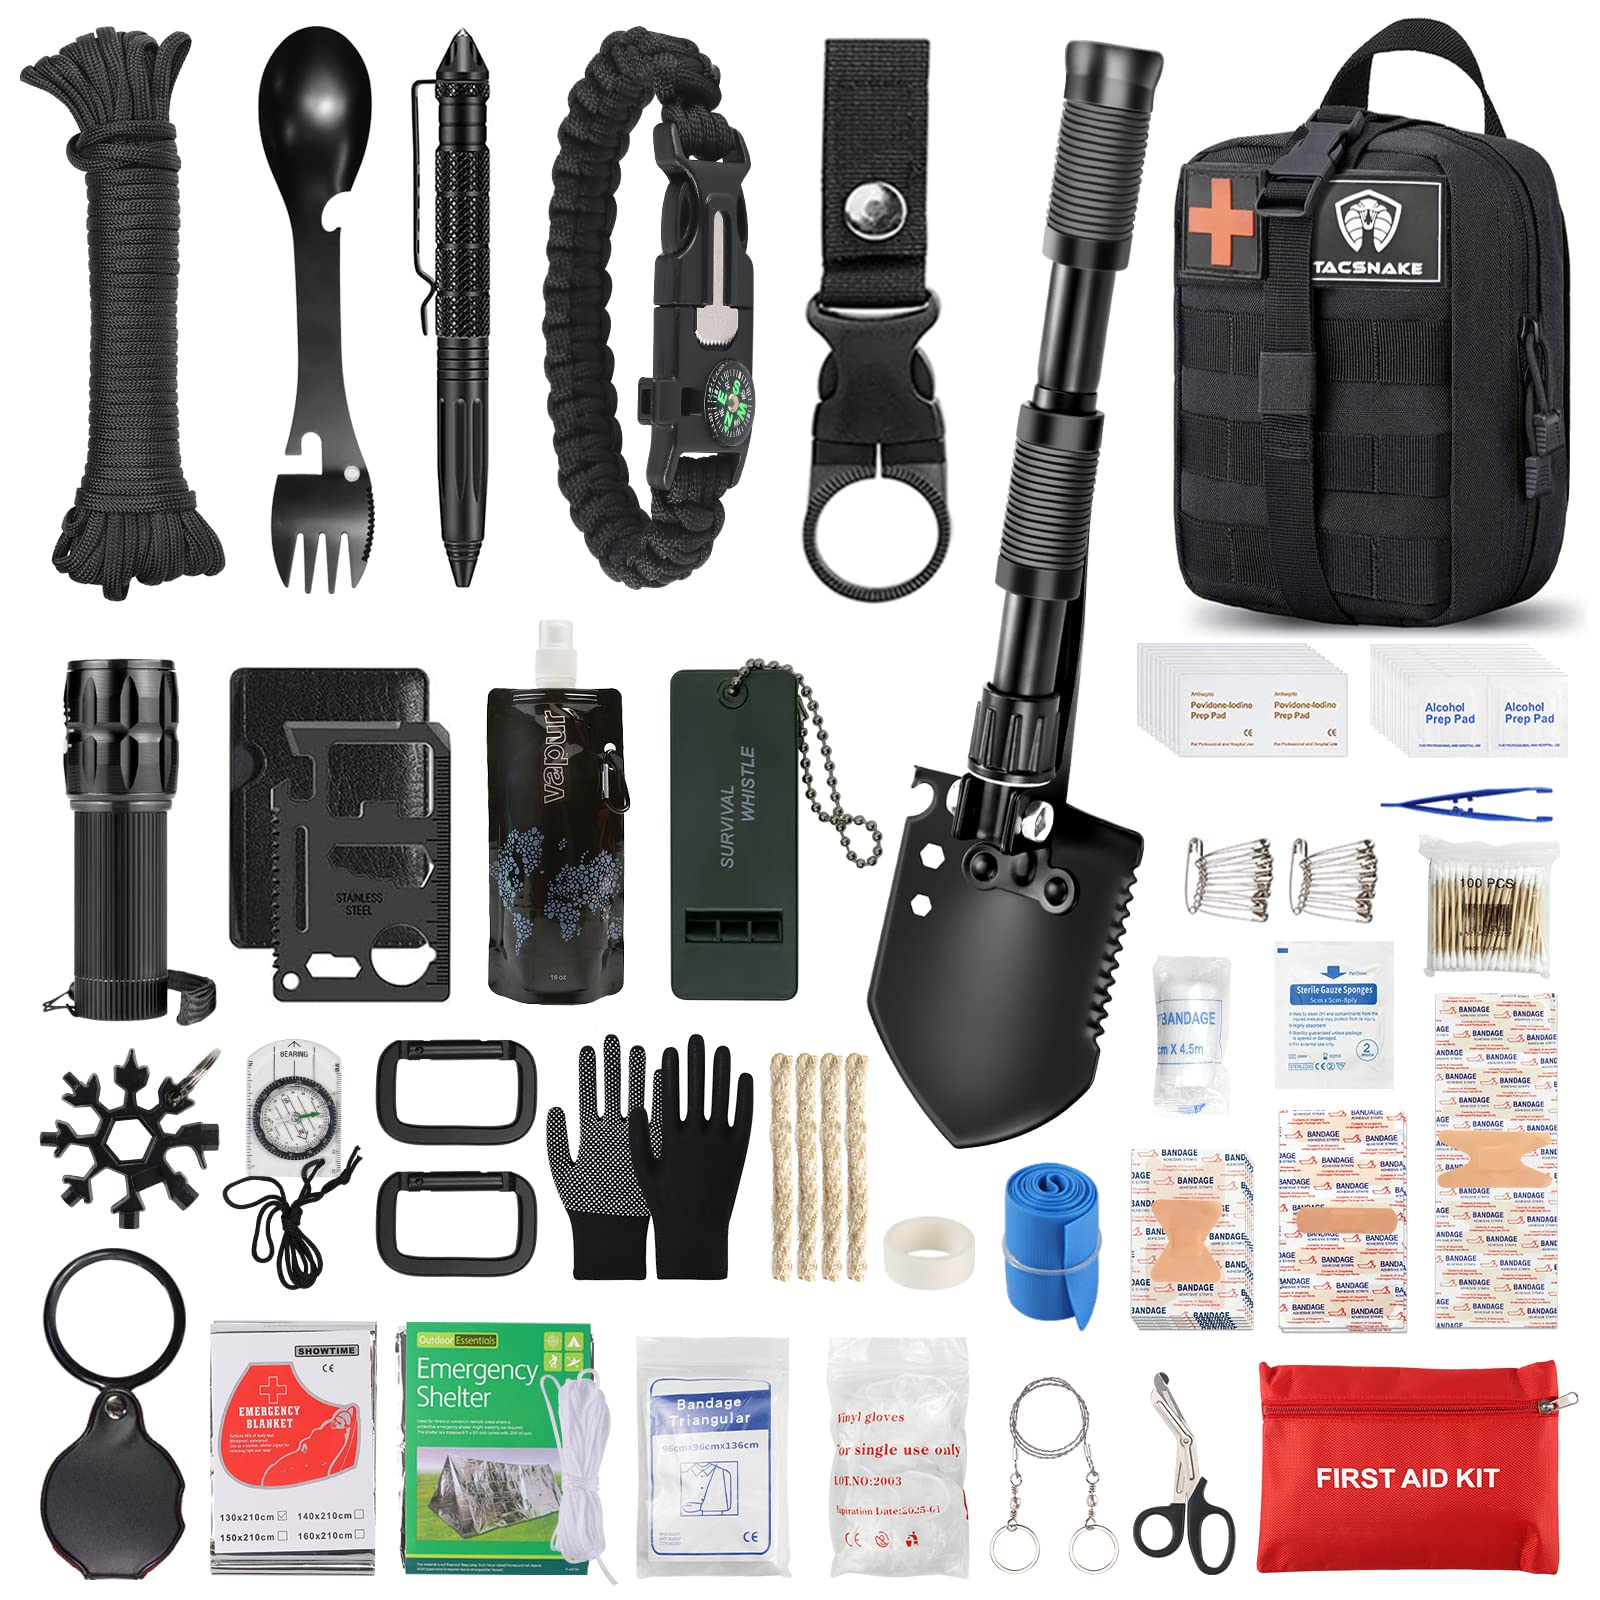 Emergency Survival Kits & First Aid Kit, Multi-Tools Survival Gear and  Equipment with Molle Pouch